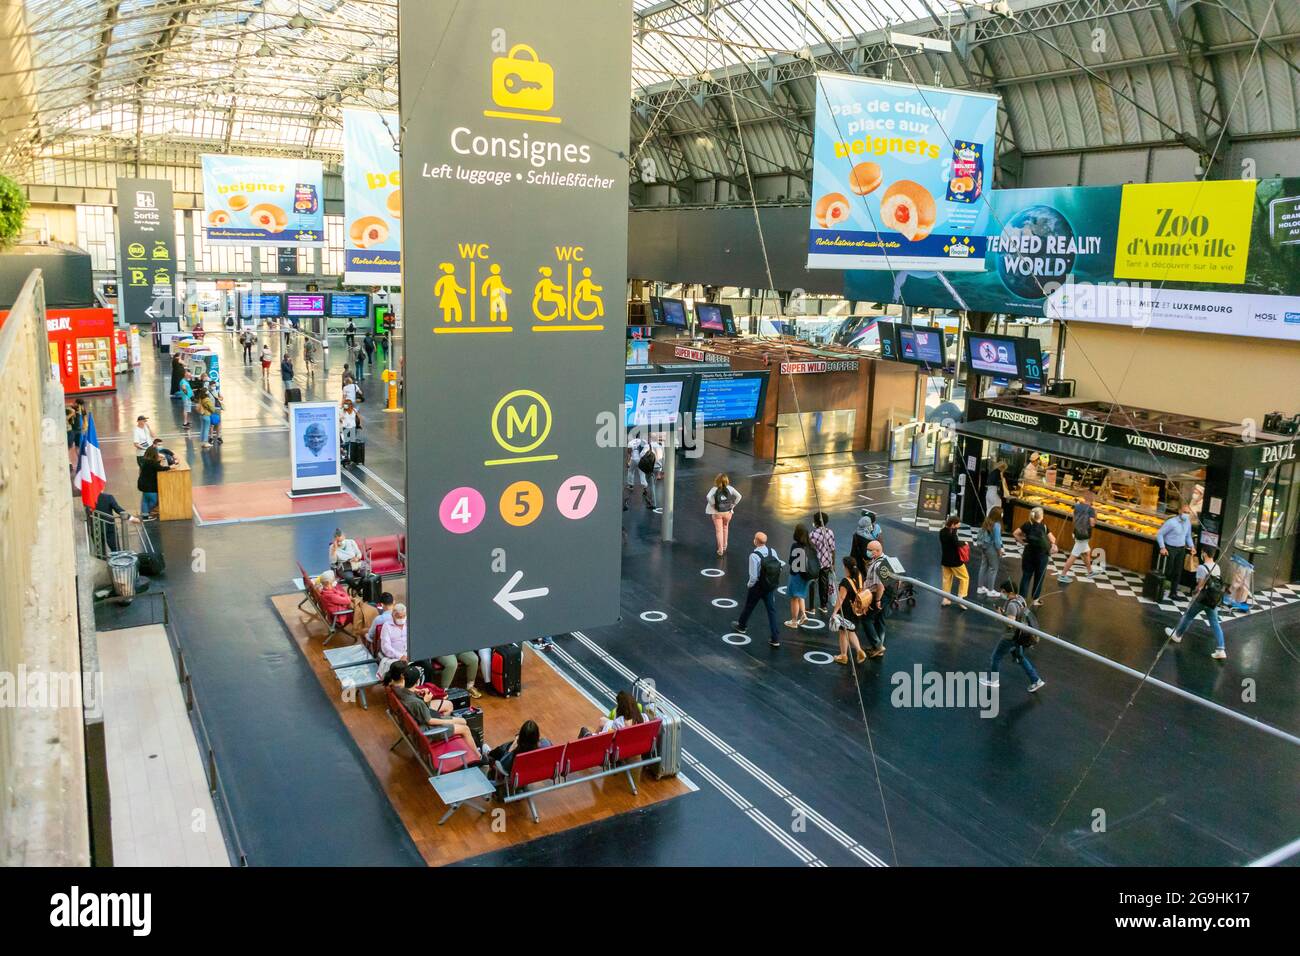 Paris, France, High Angle, Historic French Train Station, Gare de l'Est, Interiors, People Traveling, Advertising Campaign Stock Photo